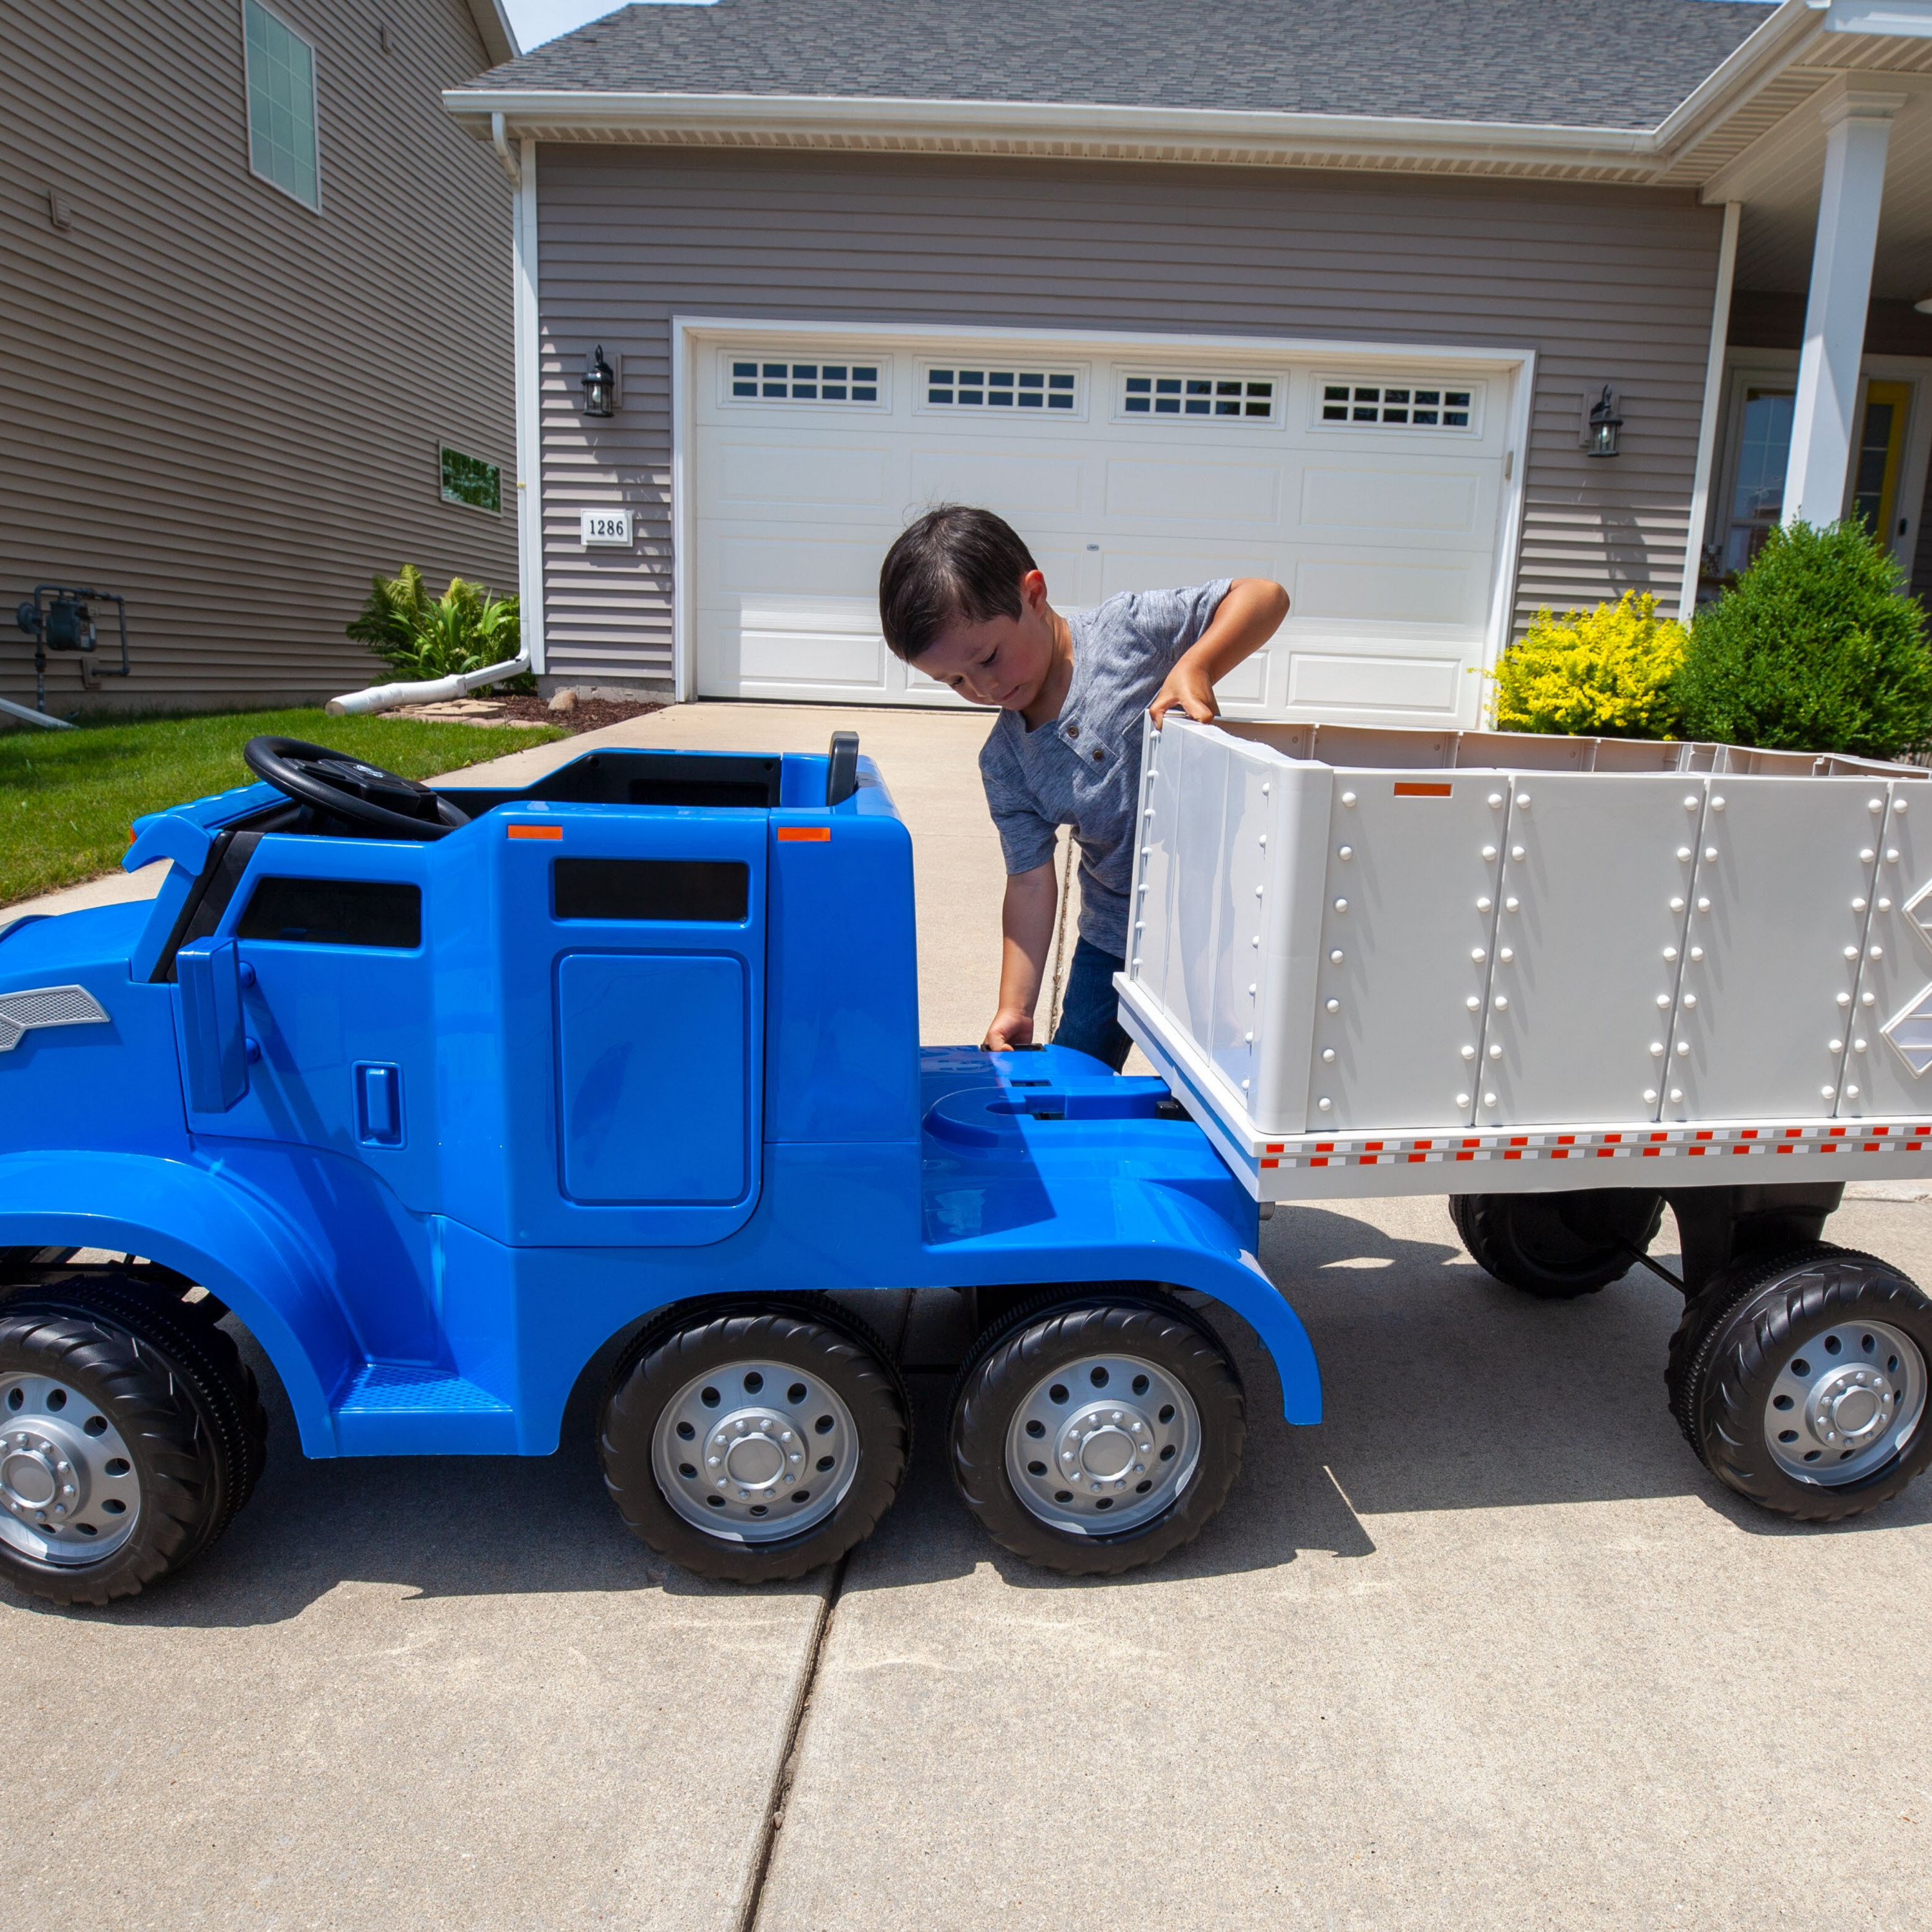 Kid Trax Semi-Truck and Trailer Ride-On Toy, Blue - image 4 of 10